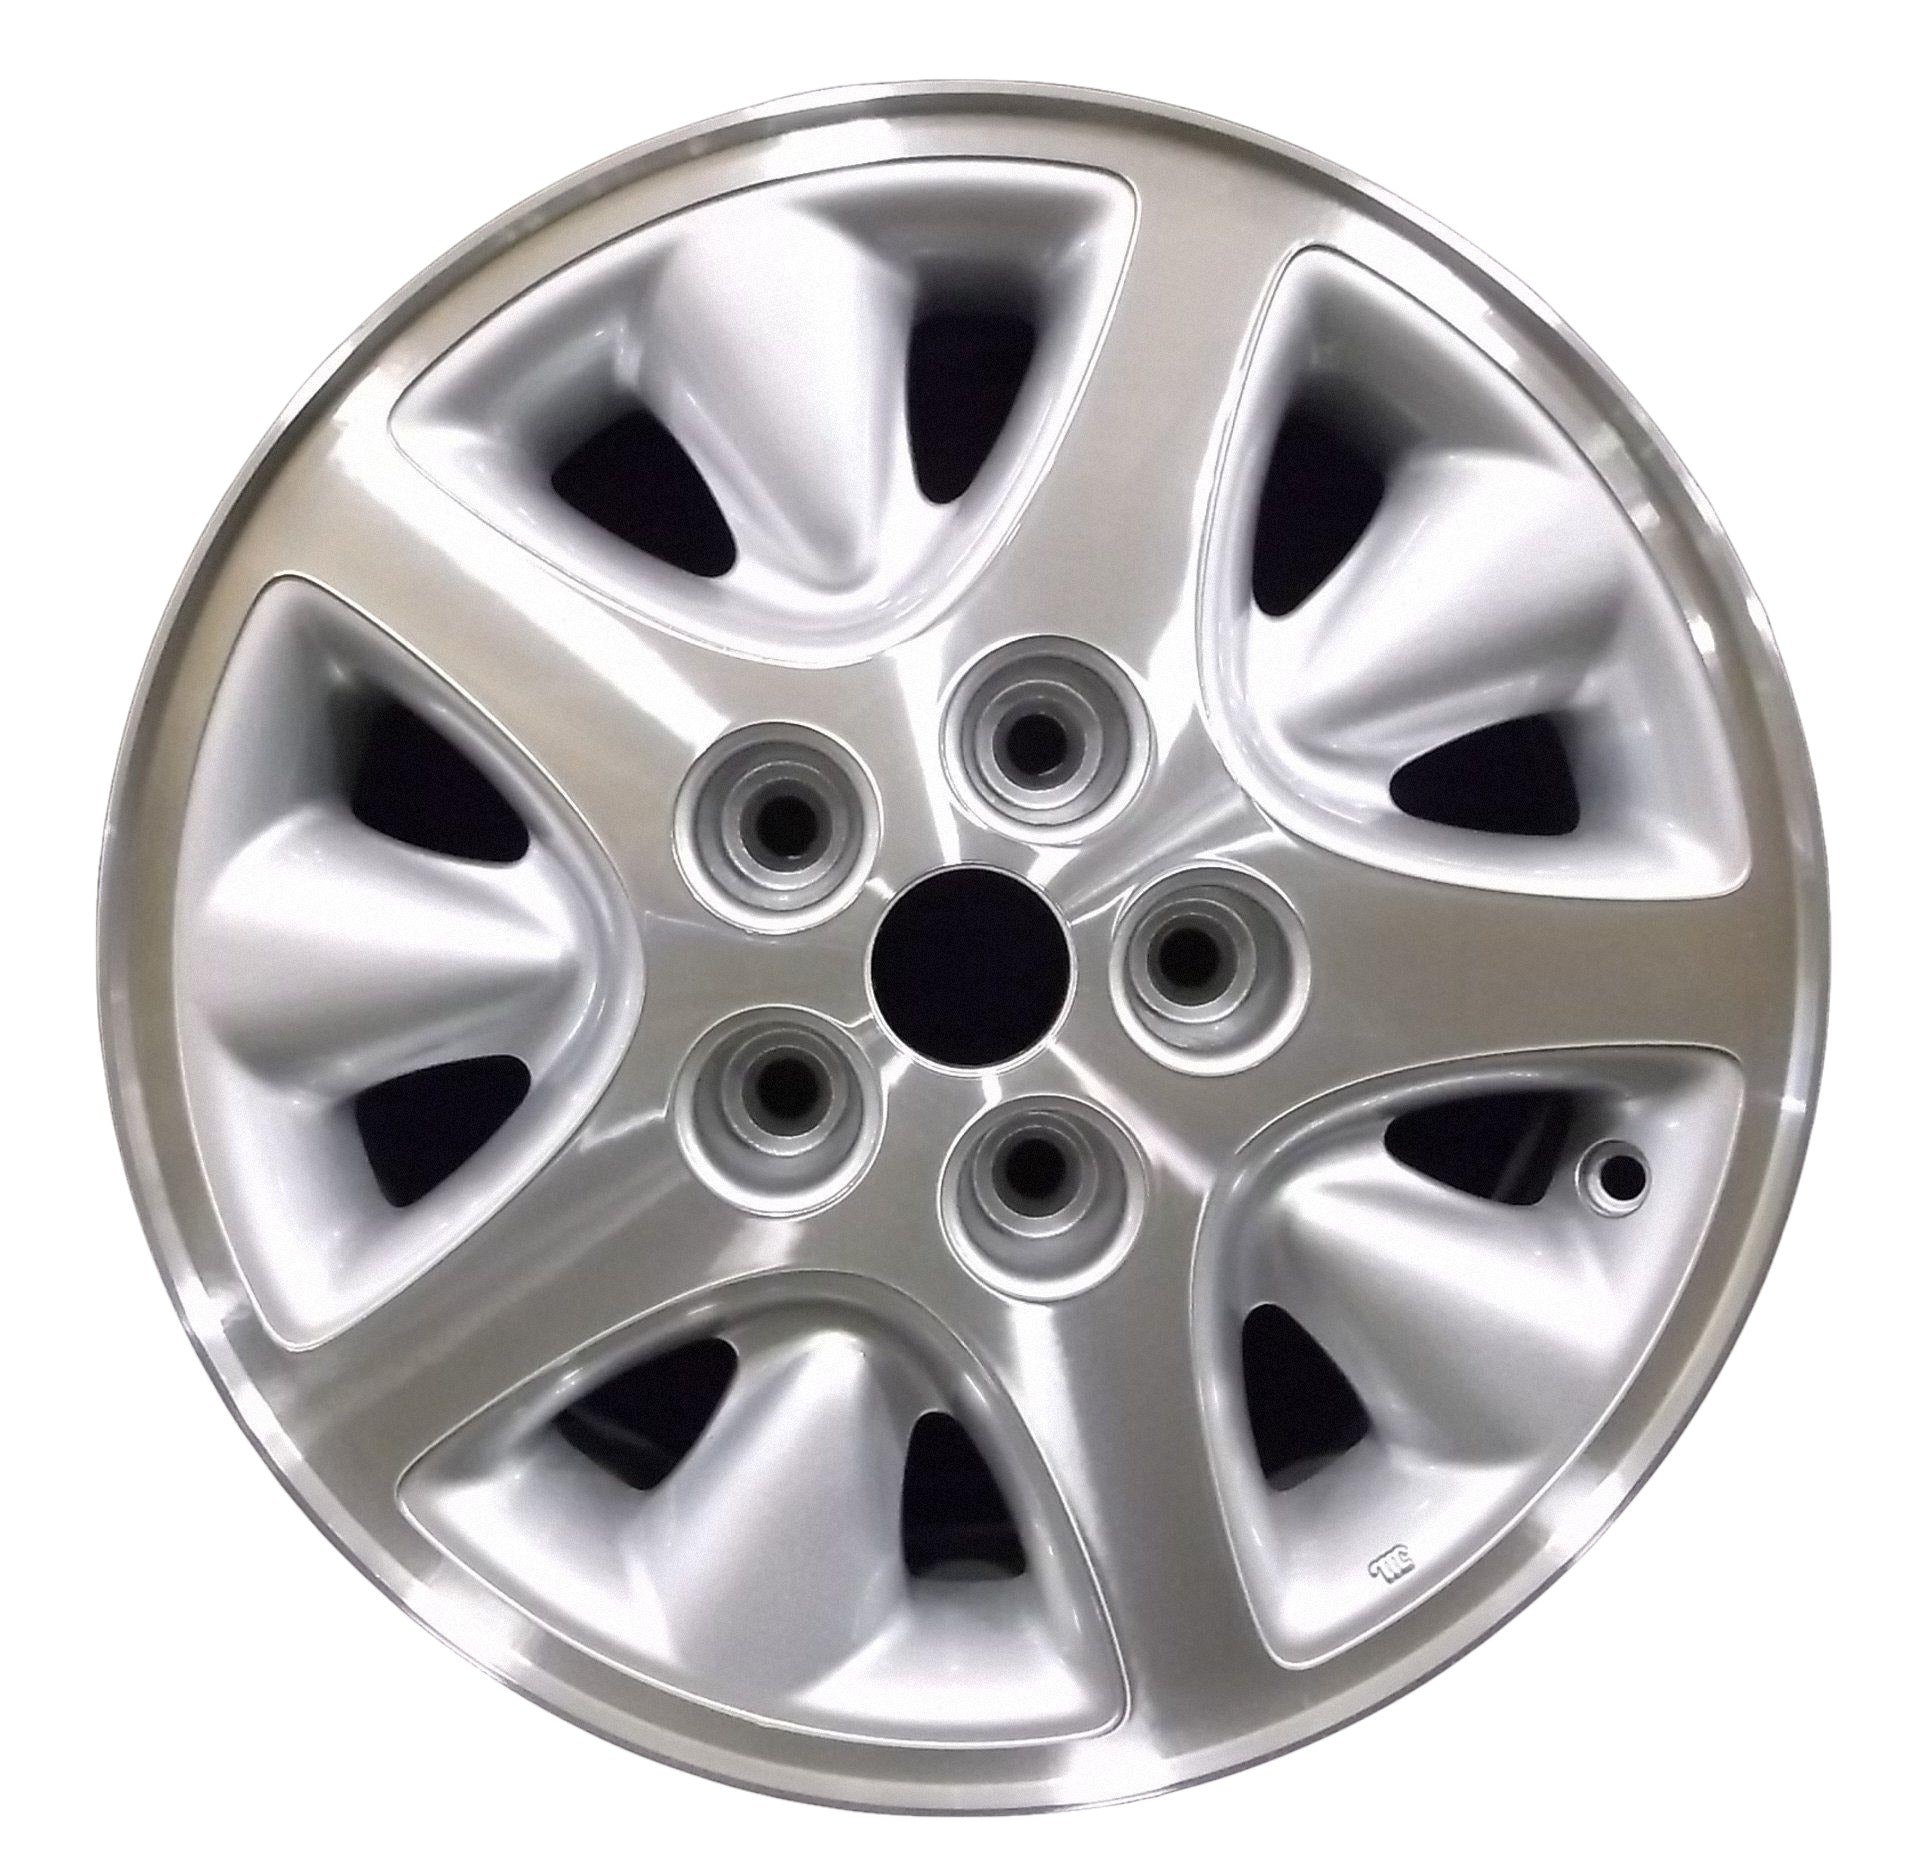 Plymouth Voyager  1996, 1997, 1998, 1999, 2000 Factory OEM Car Wheel Size 15x6.5 Alloy WAO.2071.PS01.MA